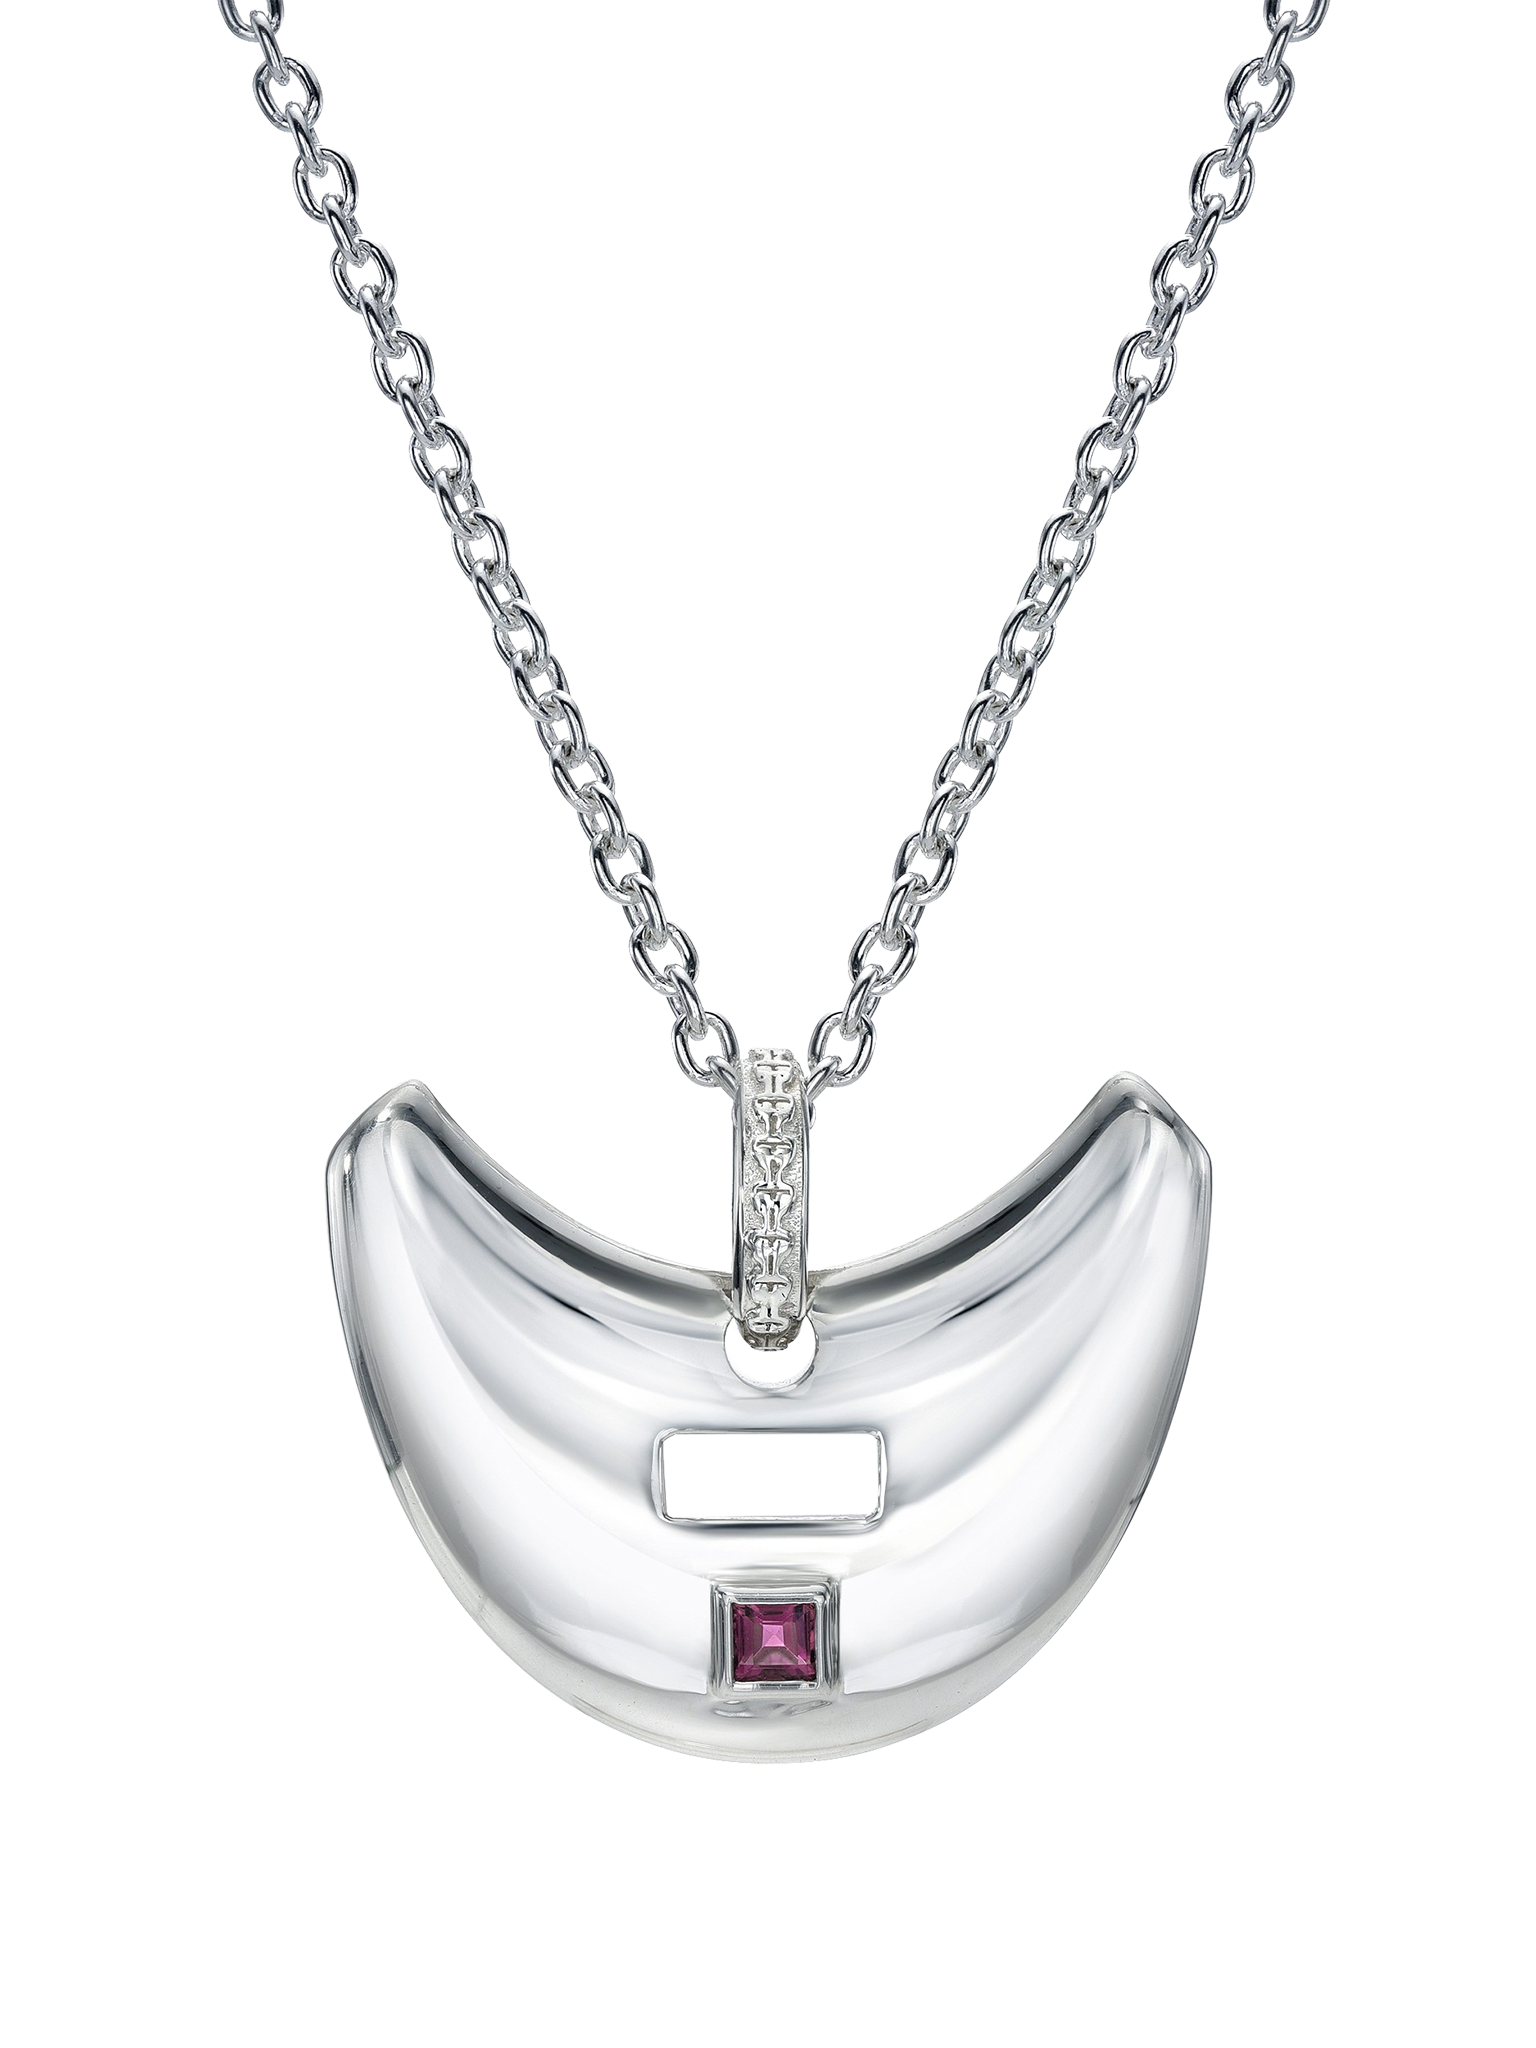 Sterling silver saucer pendant with pink tourmaline